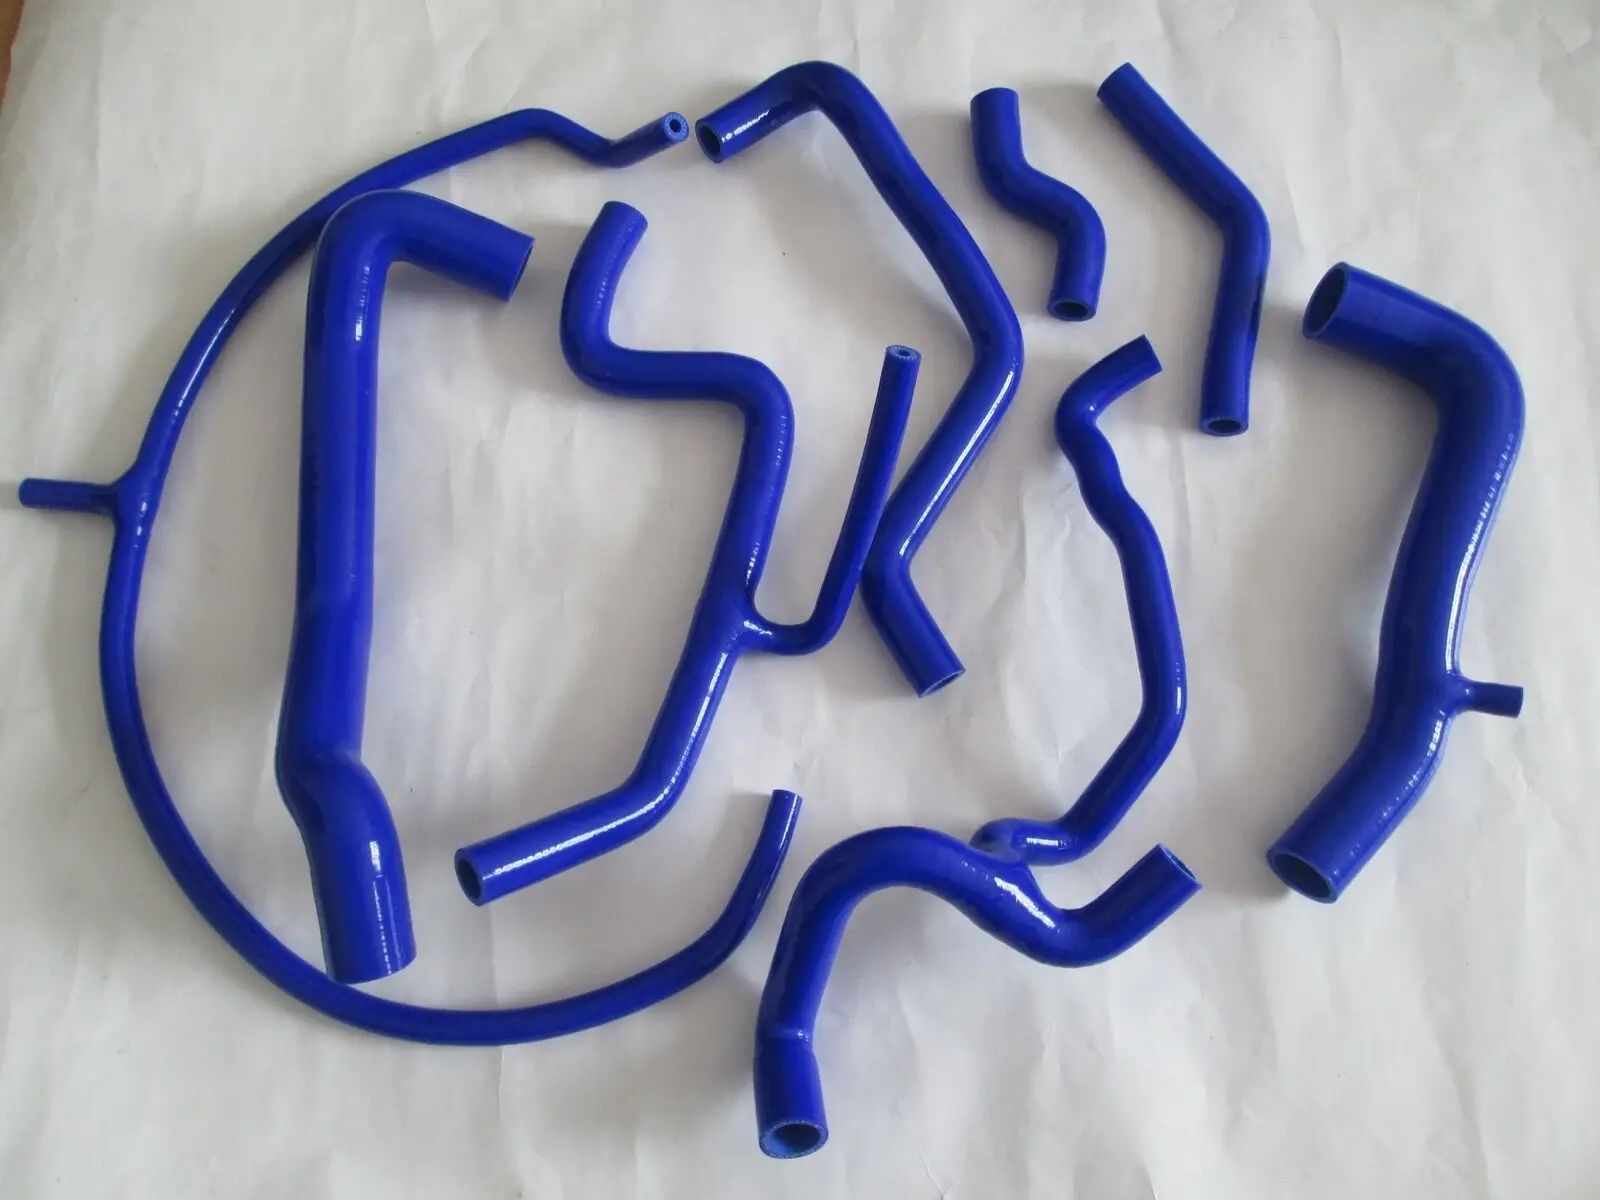 

For VW GOLF JETTA MK3 A3 VR6 2.8L 2.9L AAA/ABV ENGINE NON-US 1991-1999 Silicone Radiator Hose Pipe Tube 1991 1992 1994 1995 1996